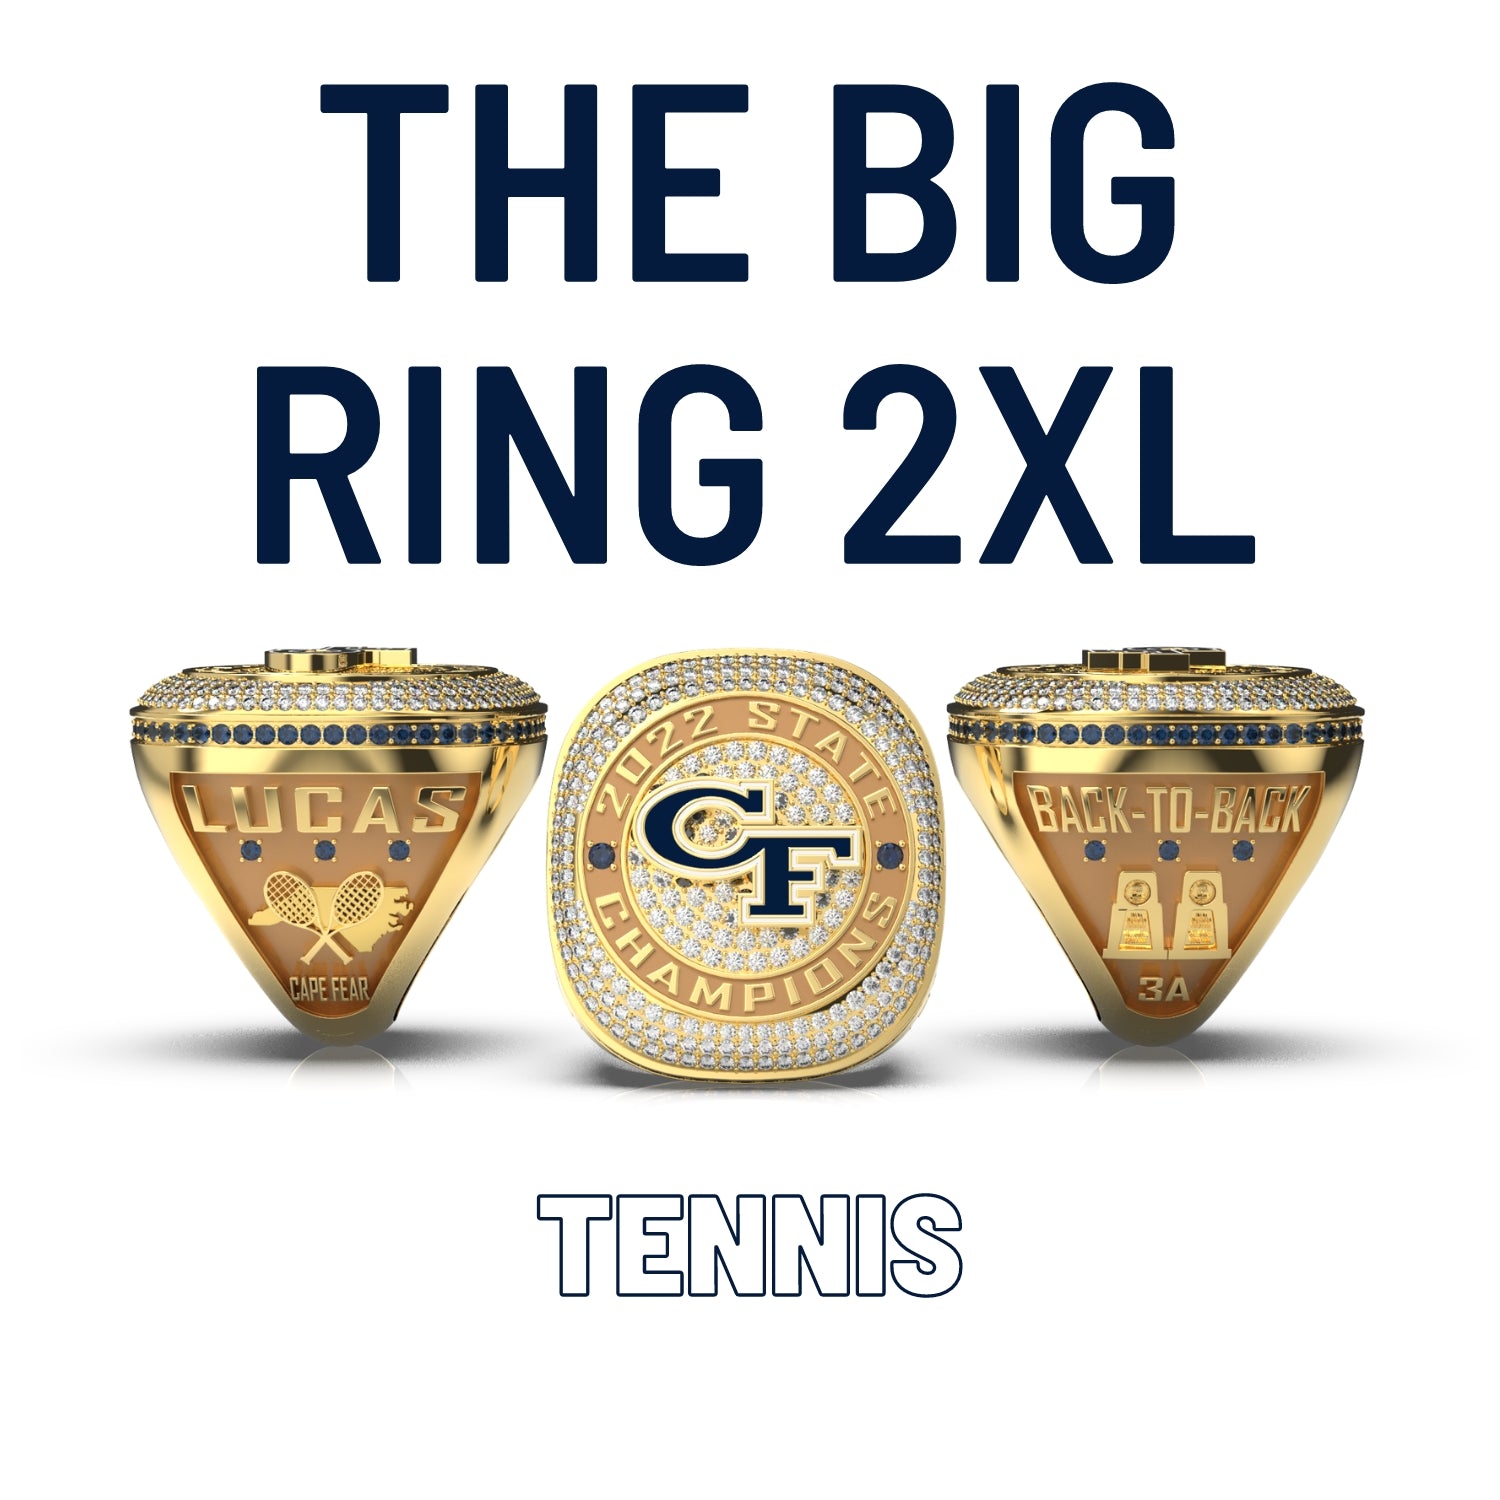 THE BIG ONE - 2XL Cape Fear Women's Tennis - 2022 Championship Ring